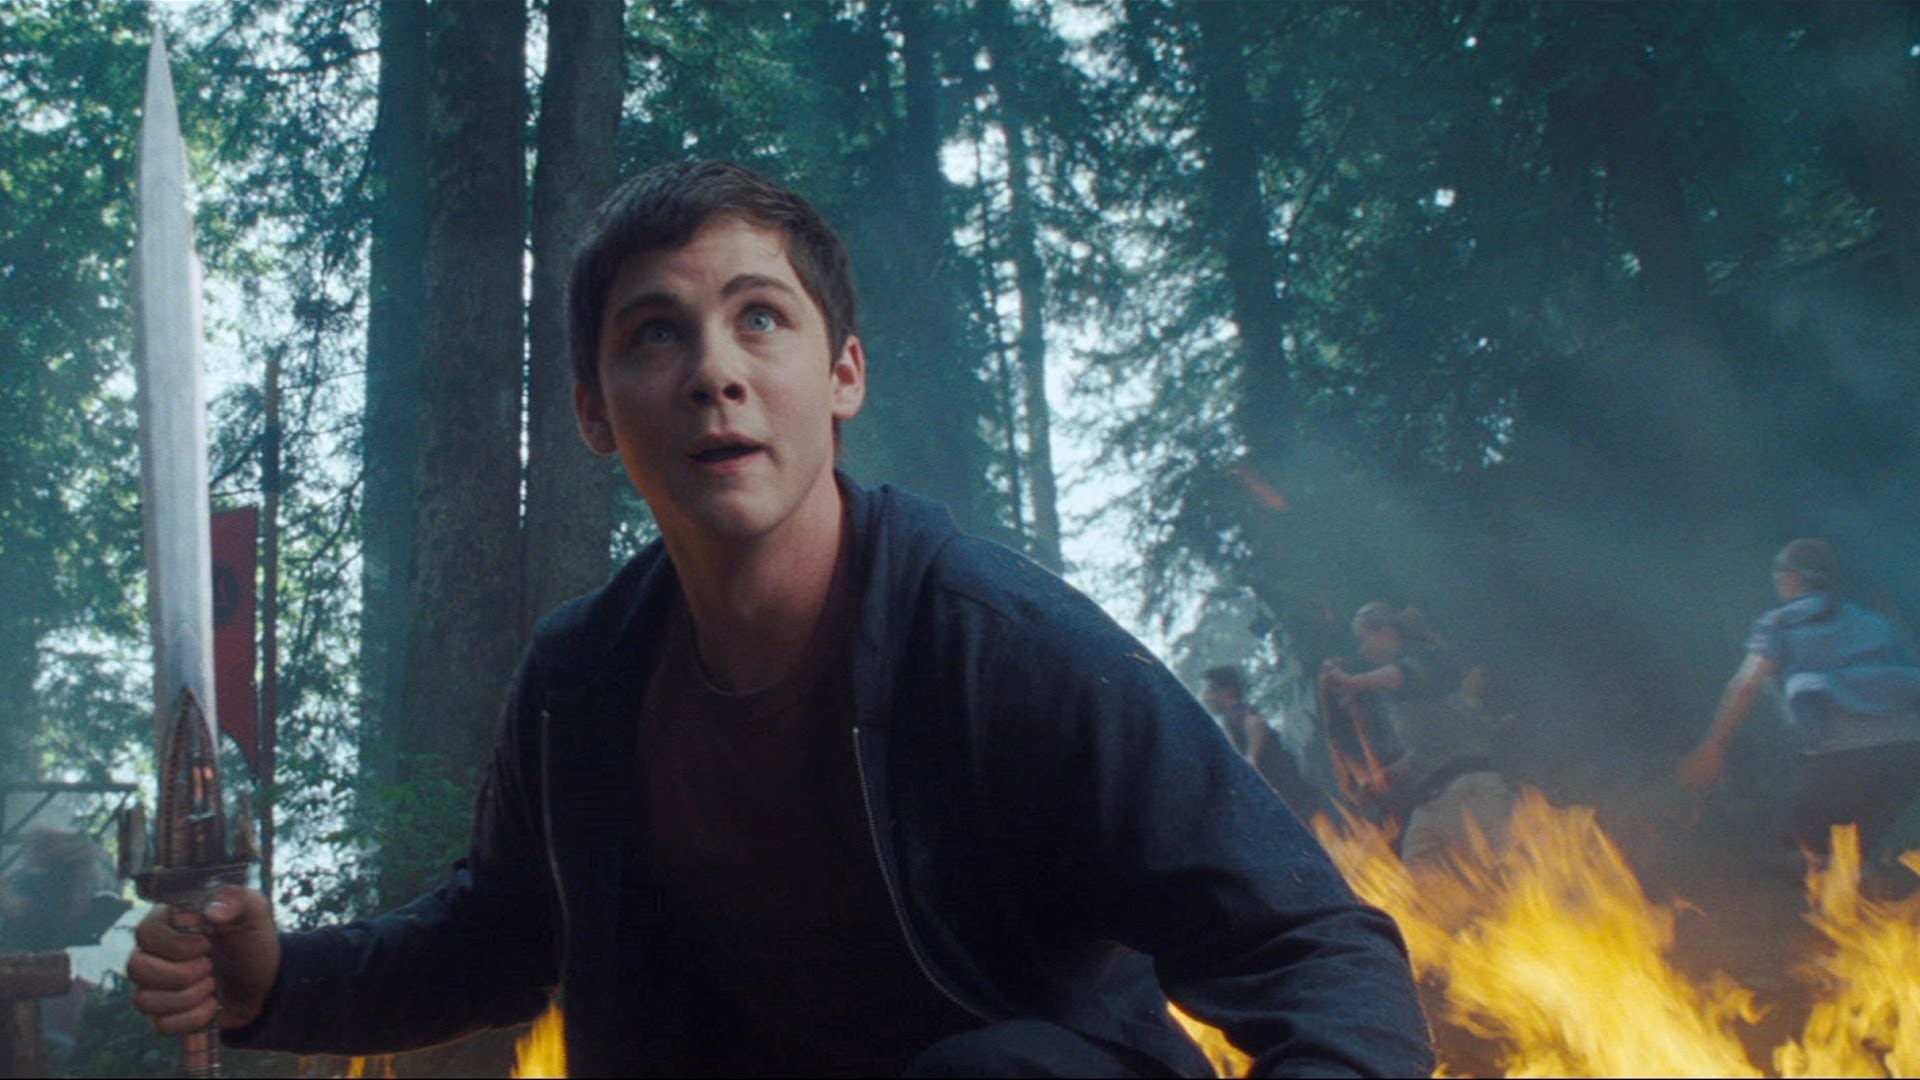 1920x1080 'Percy Jackson: Sea of Monsters' Trailer - YouTube